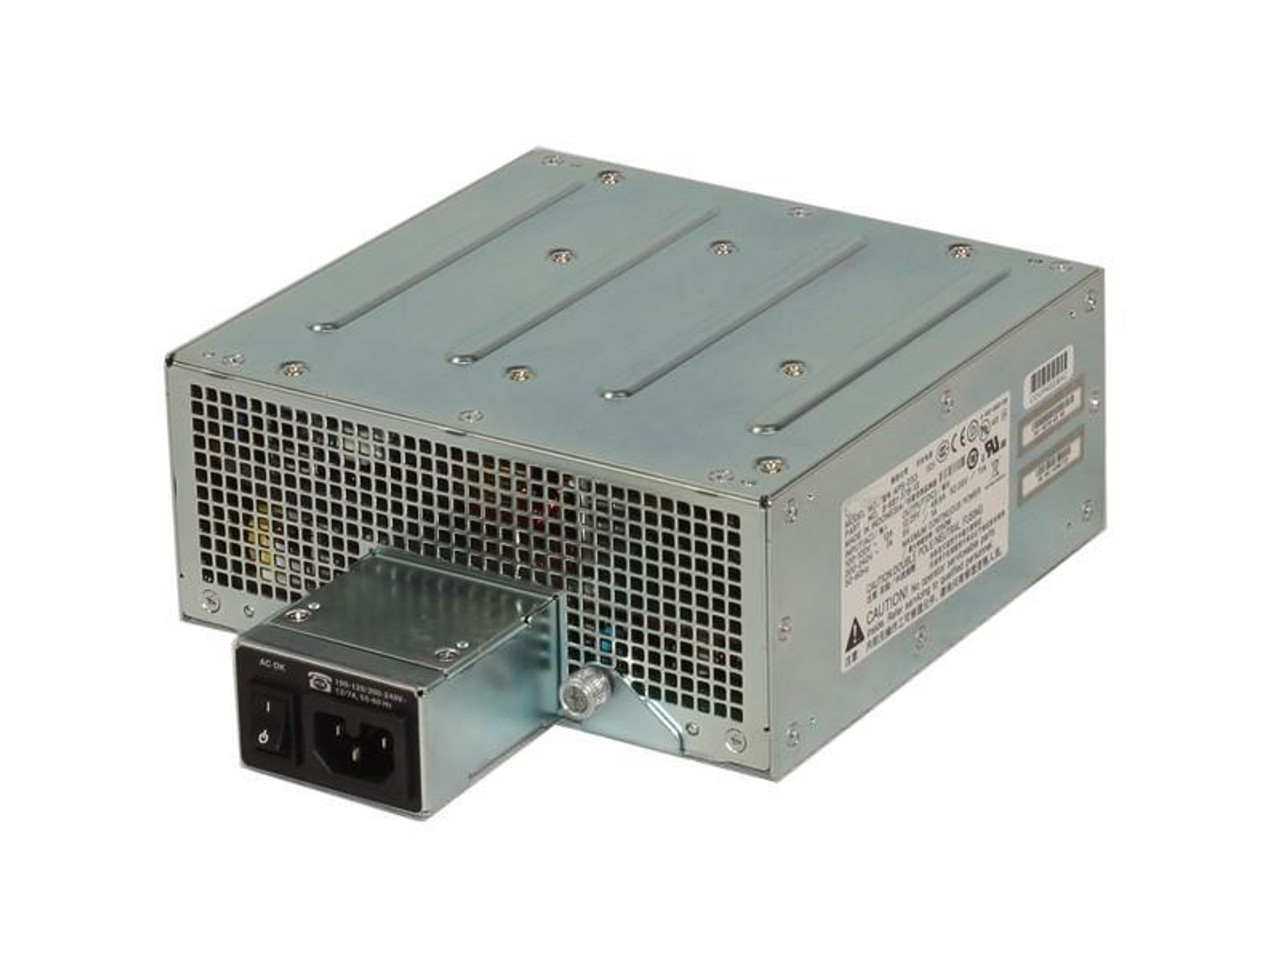 PWR-3900-POE-X Cisco AC Power Supply for 3925/3945 (Refurbished)